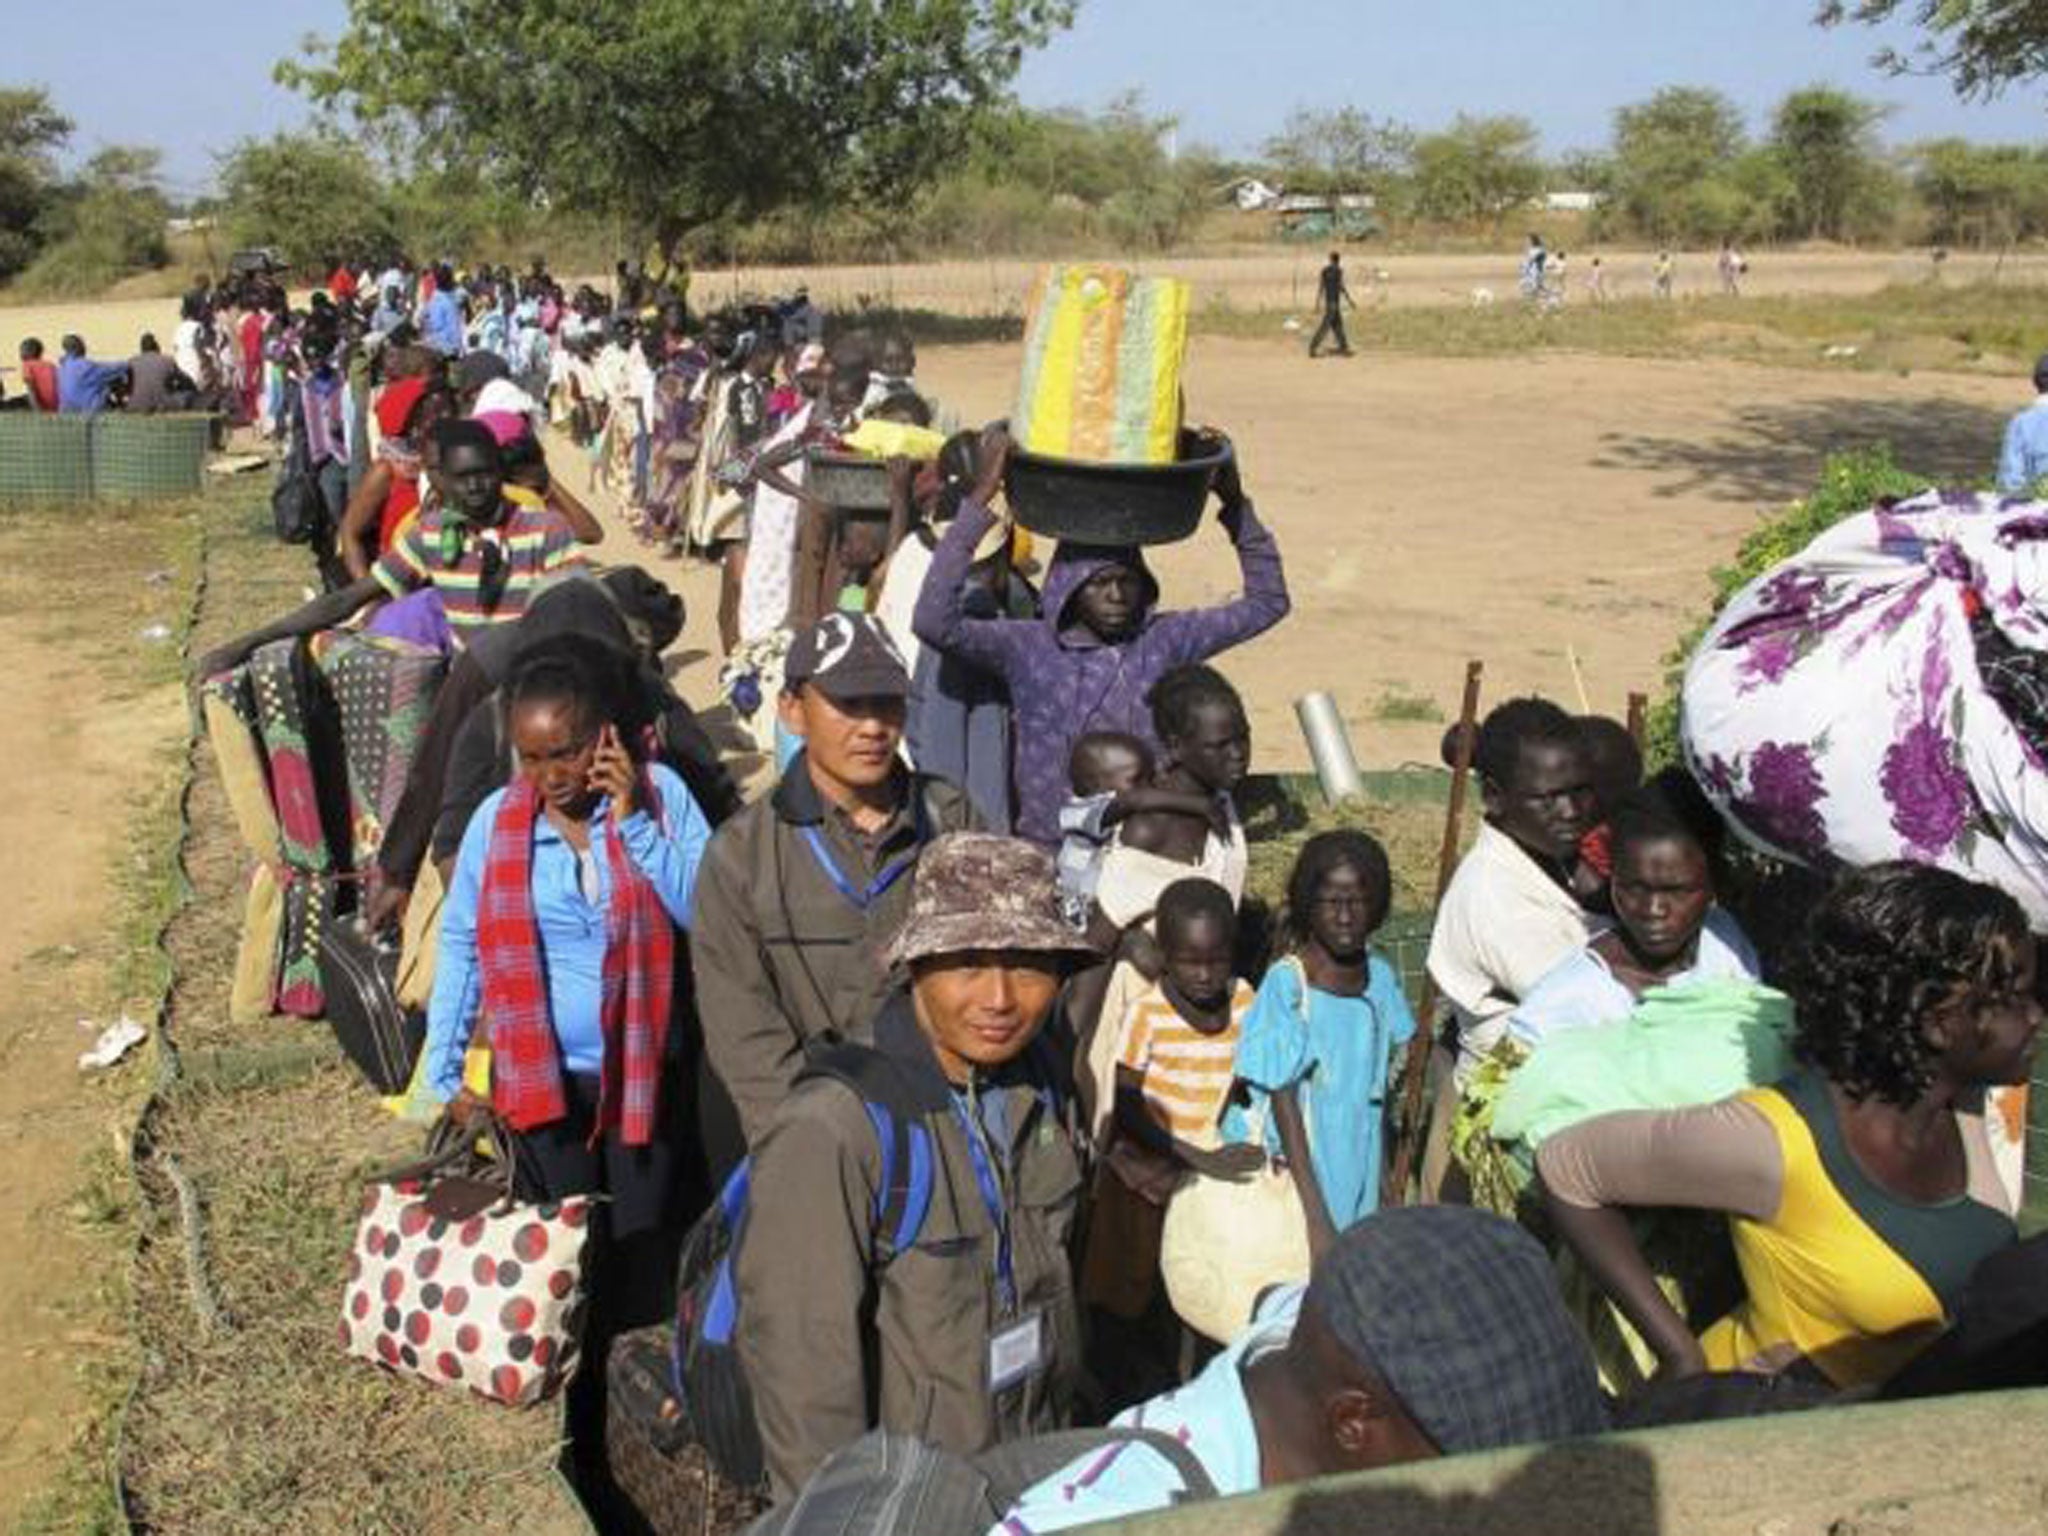 Civilians arrive for shelter at the United Nations Mission in the Republic of South Sudan (UNMISS) compound in Bor, South Sudan in this December 18, 2013